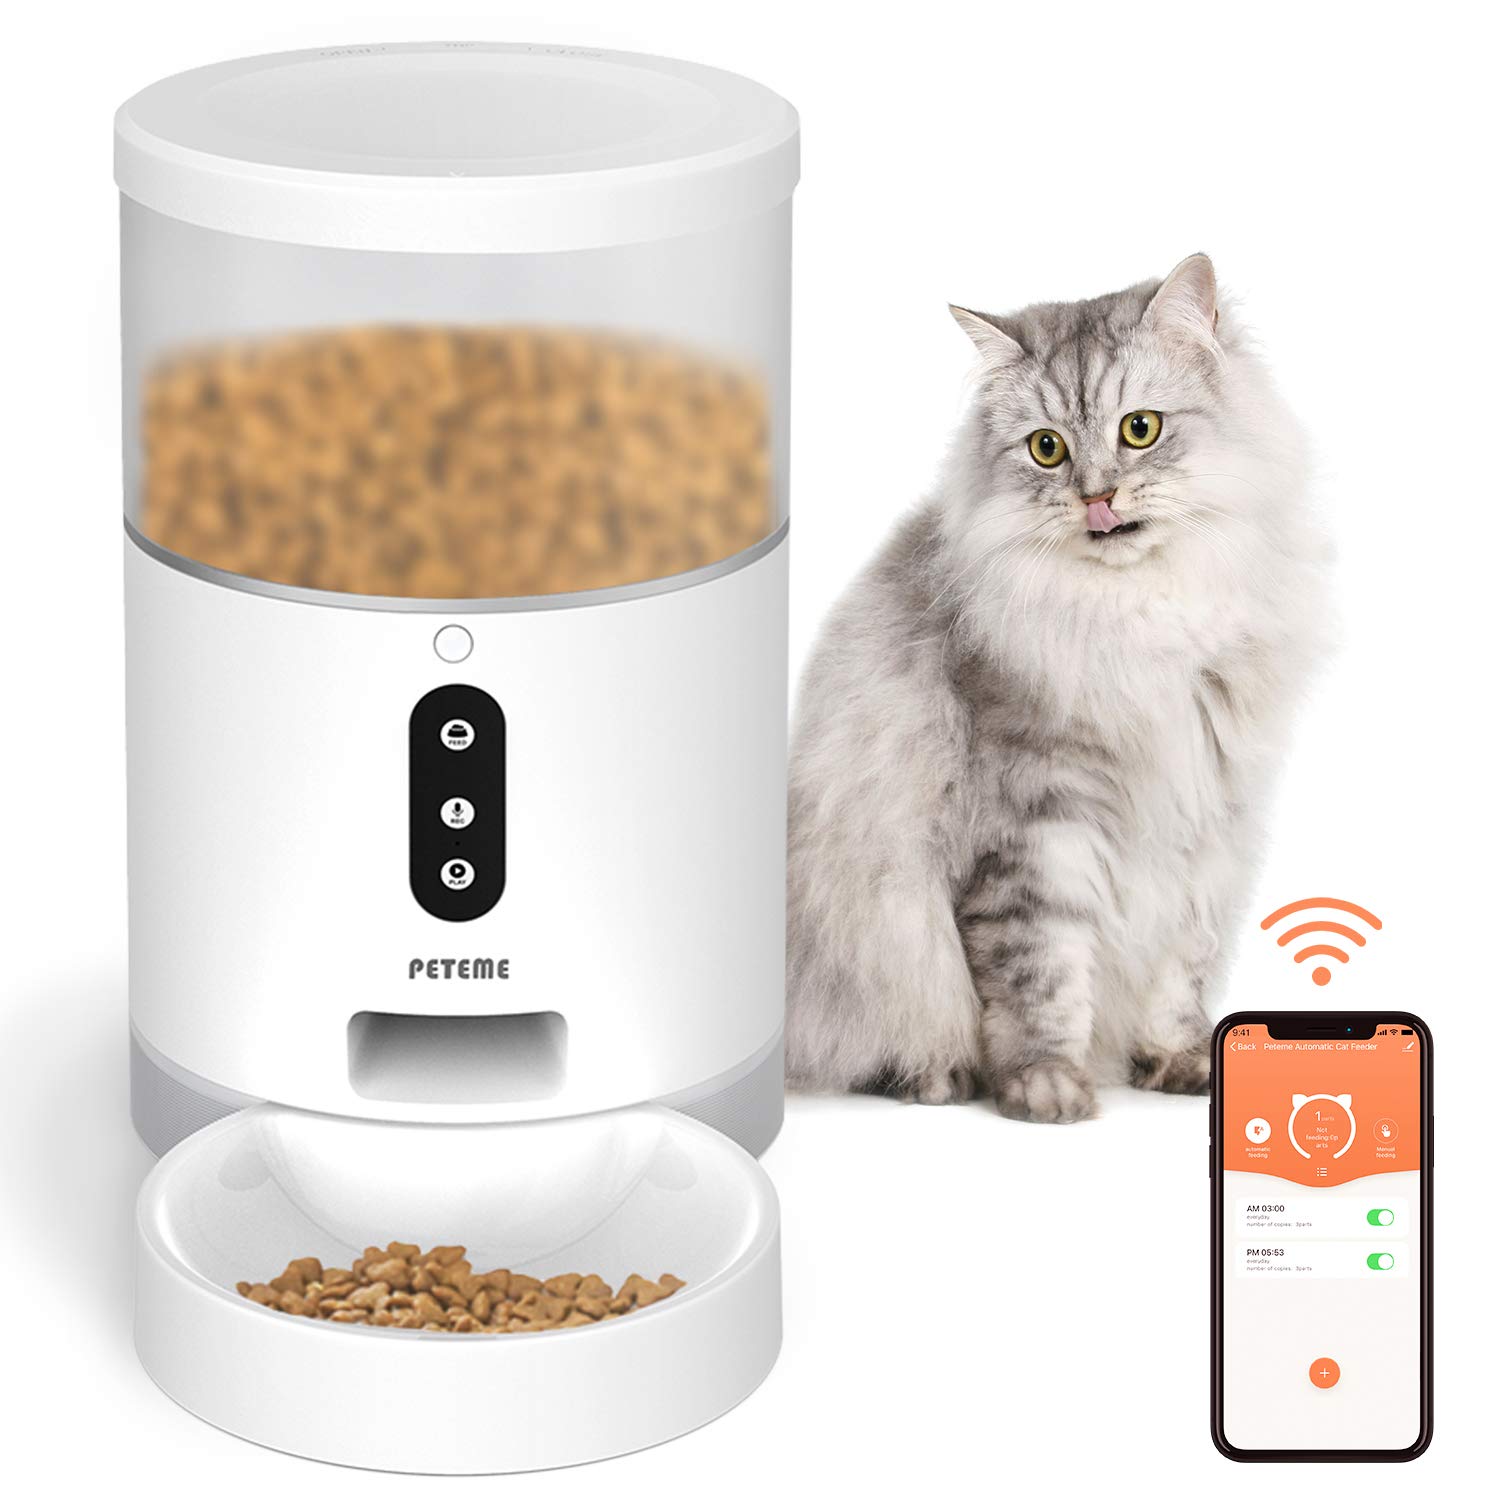 Peteme Automatic Cat Feeder, Smart Pet Feeder with APP Control